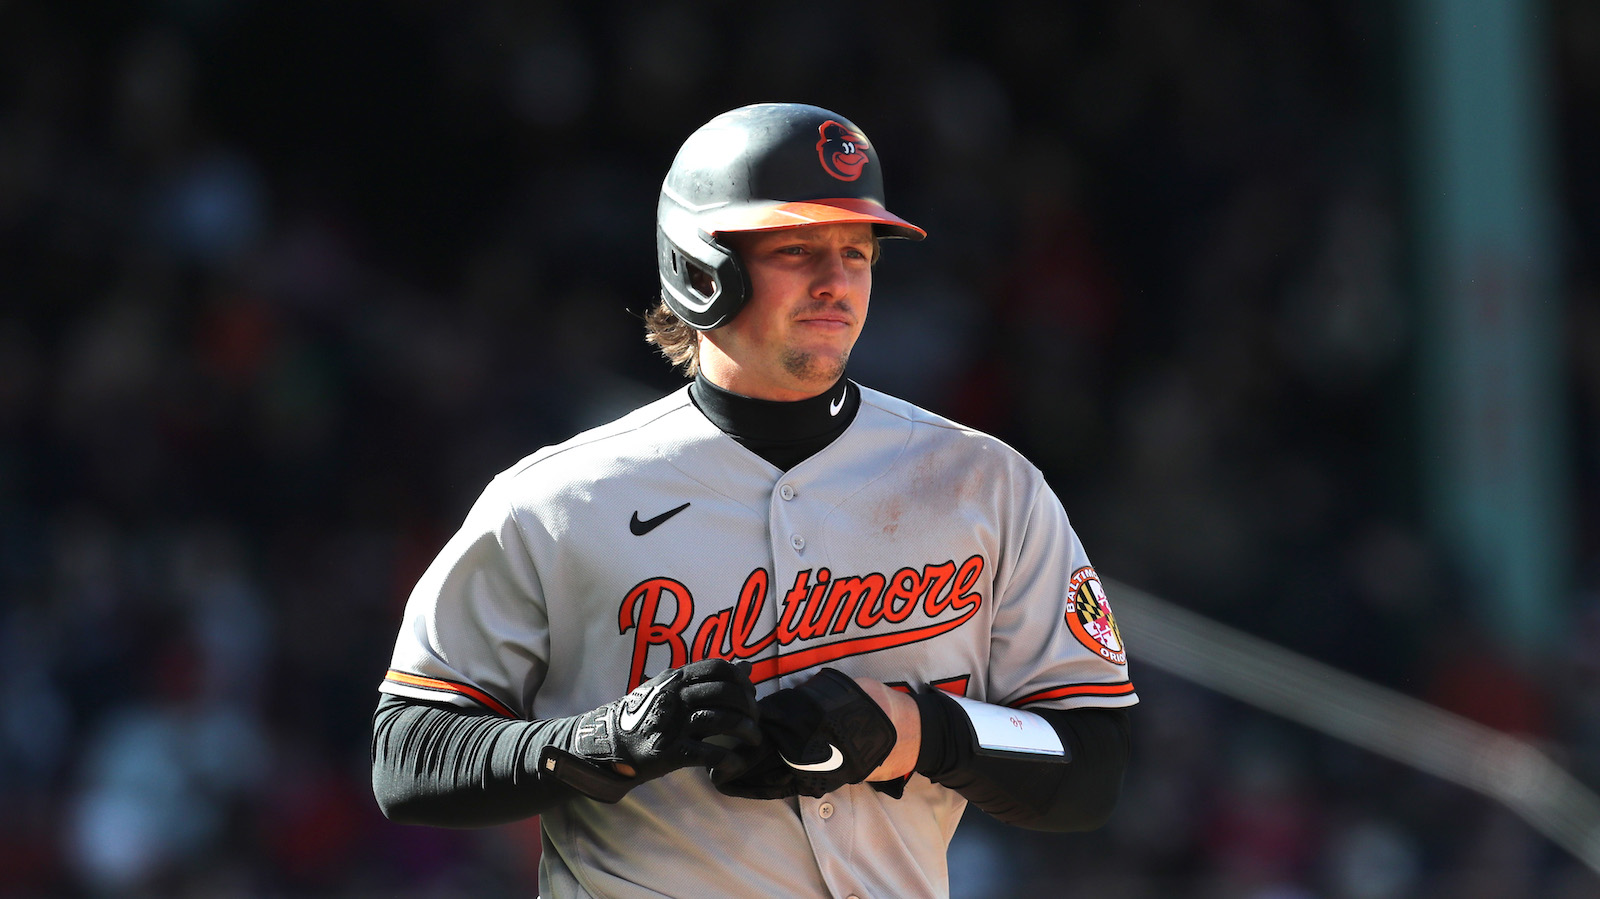 BOSTON, MASSACHUSETTS - MARCH 30: Adley Rutschman #35 of the Baltimore Orioles reacts during the fourth inning against the Boston Red Sox on Opening Day at Fenway Park on March 30, 2023 in Boston, Massachusetts.